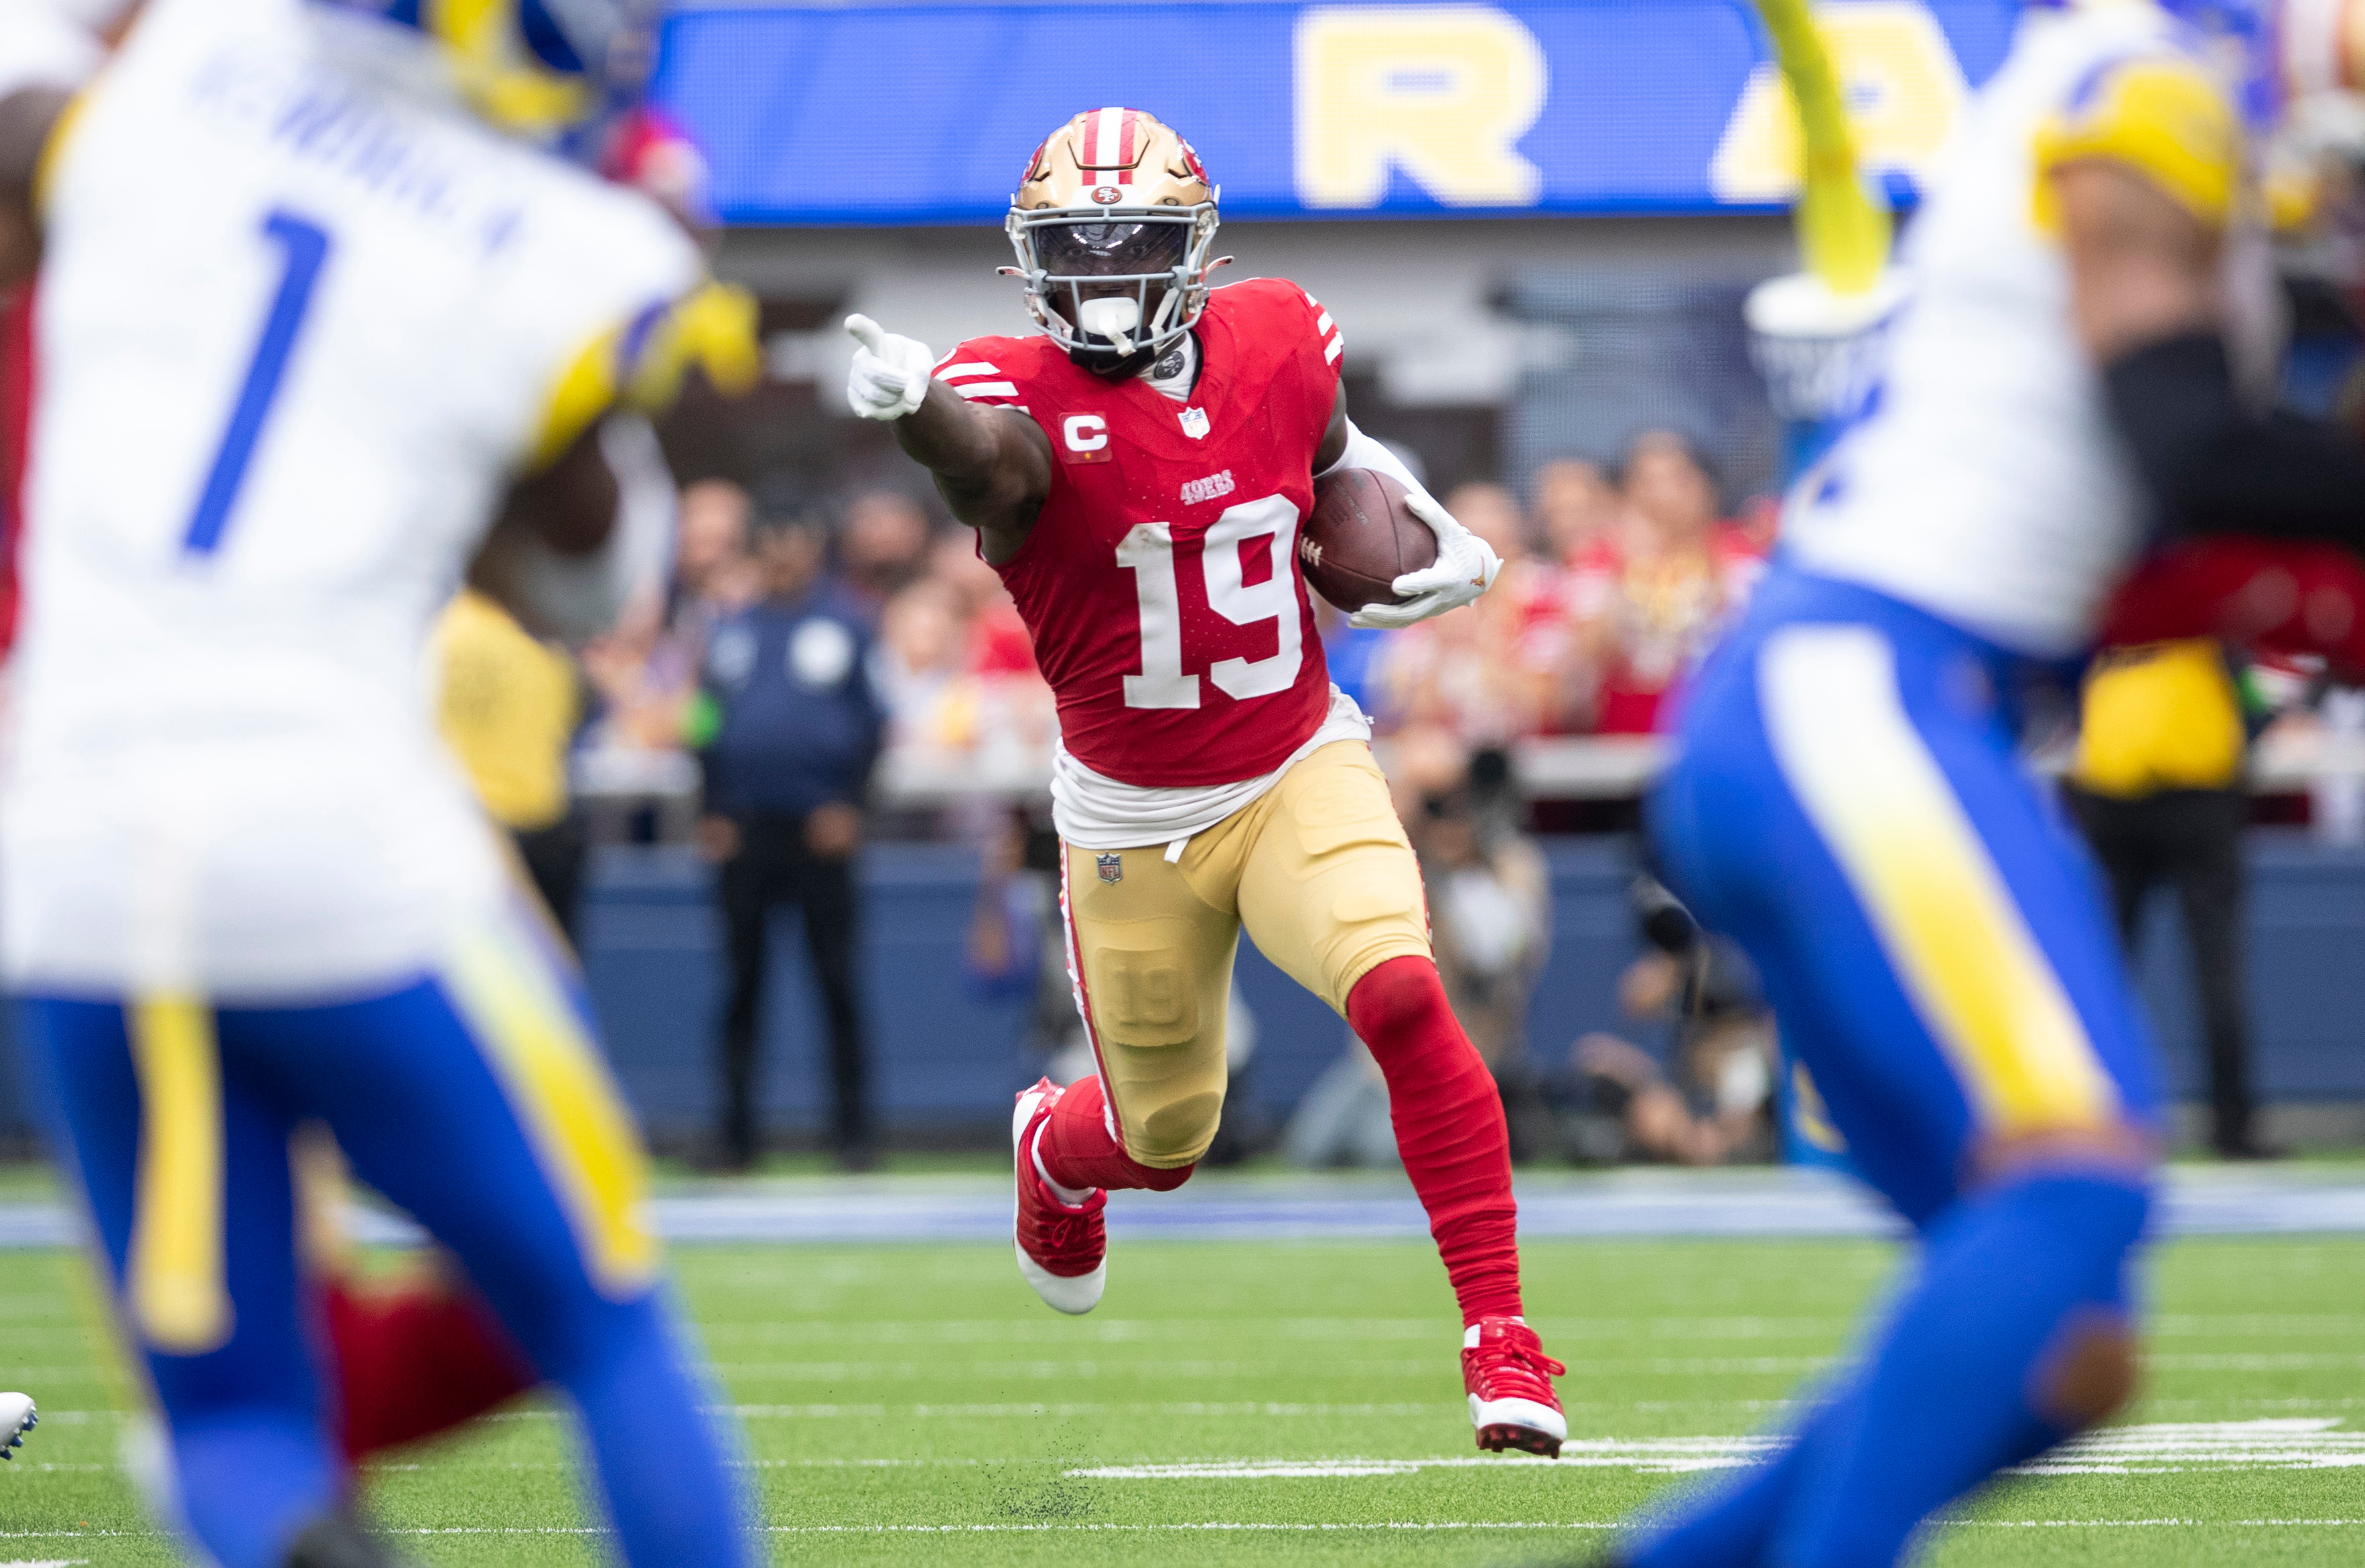 49ers vs. Rams: How to Watch the Week 2 NFL Game Today, Start Time